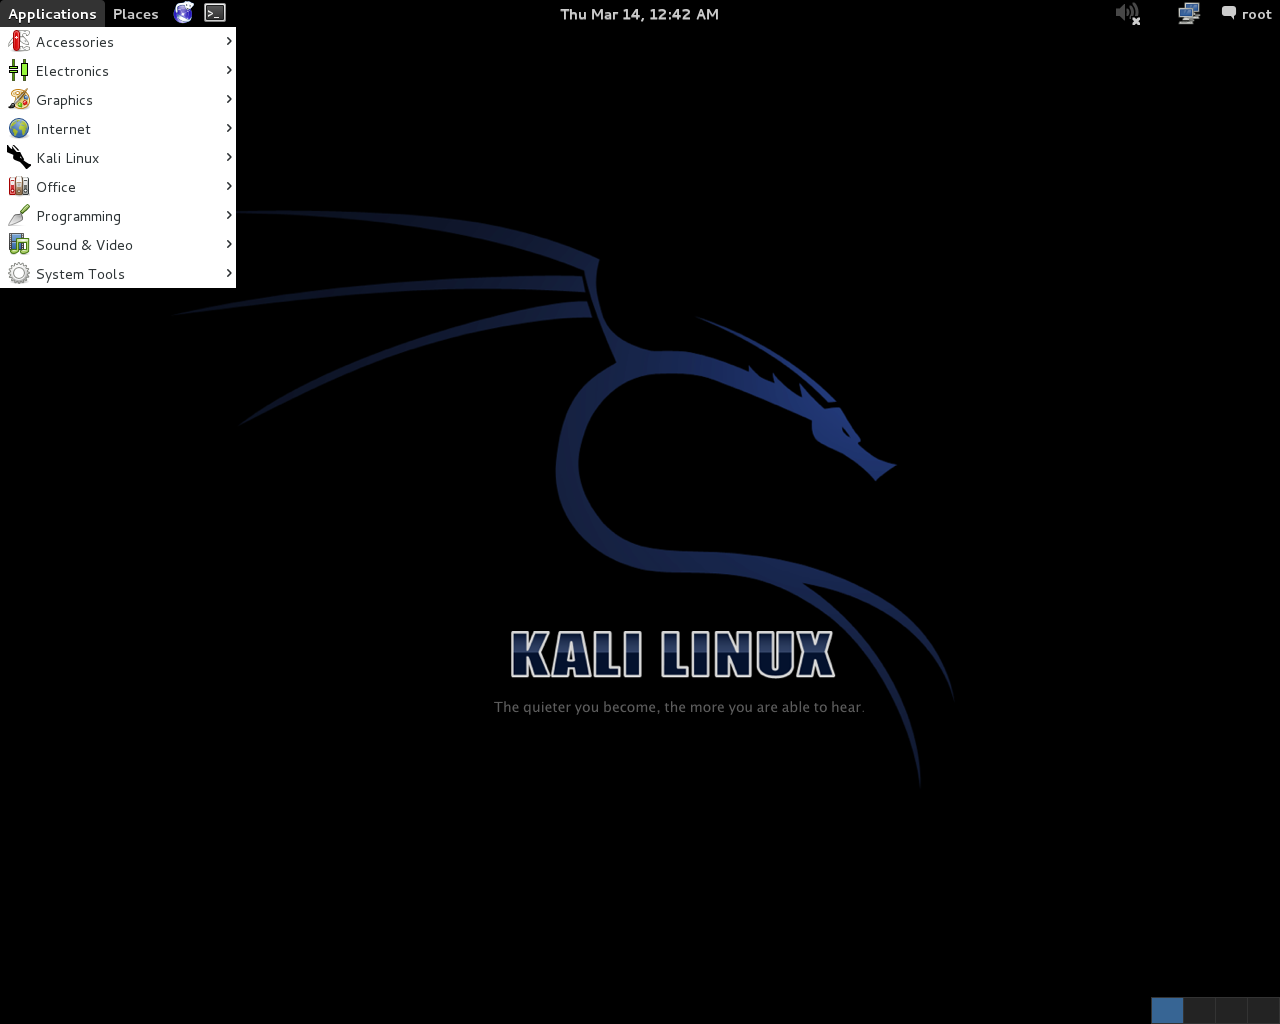 Kali Linux In Action Image Courtesy Distrowatch